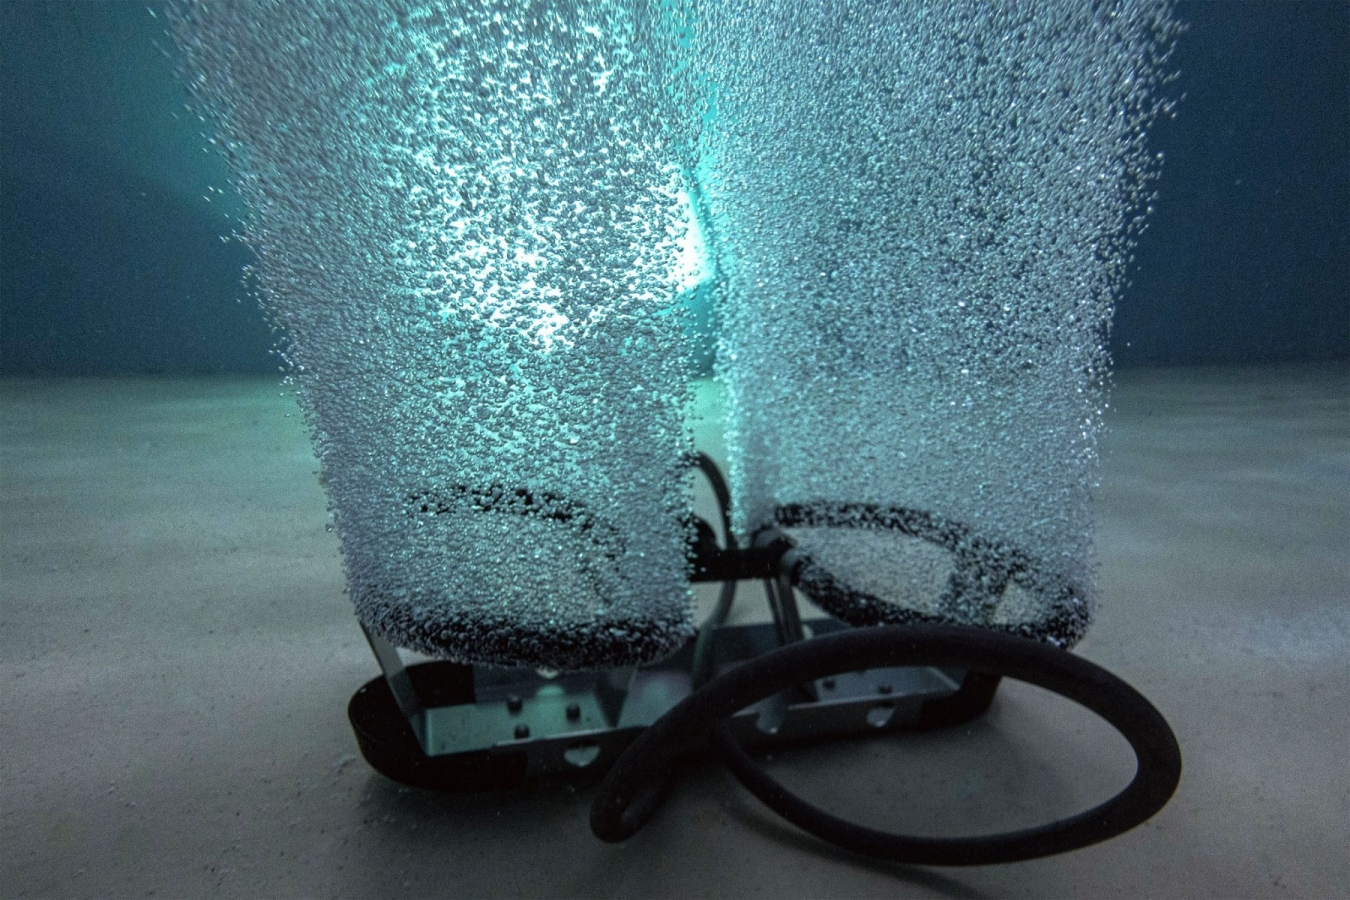 Kasco Robust-Aire™ Diffused Aeration System - Aerating Under Water Close-up View